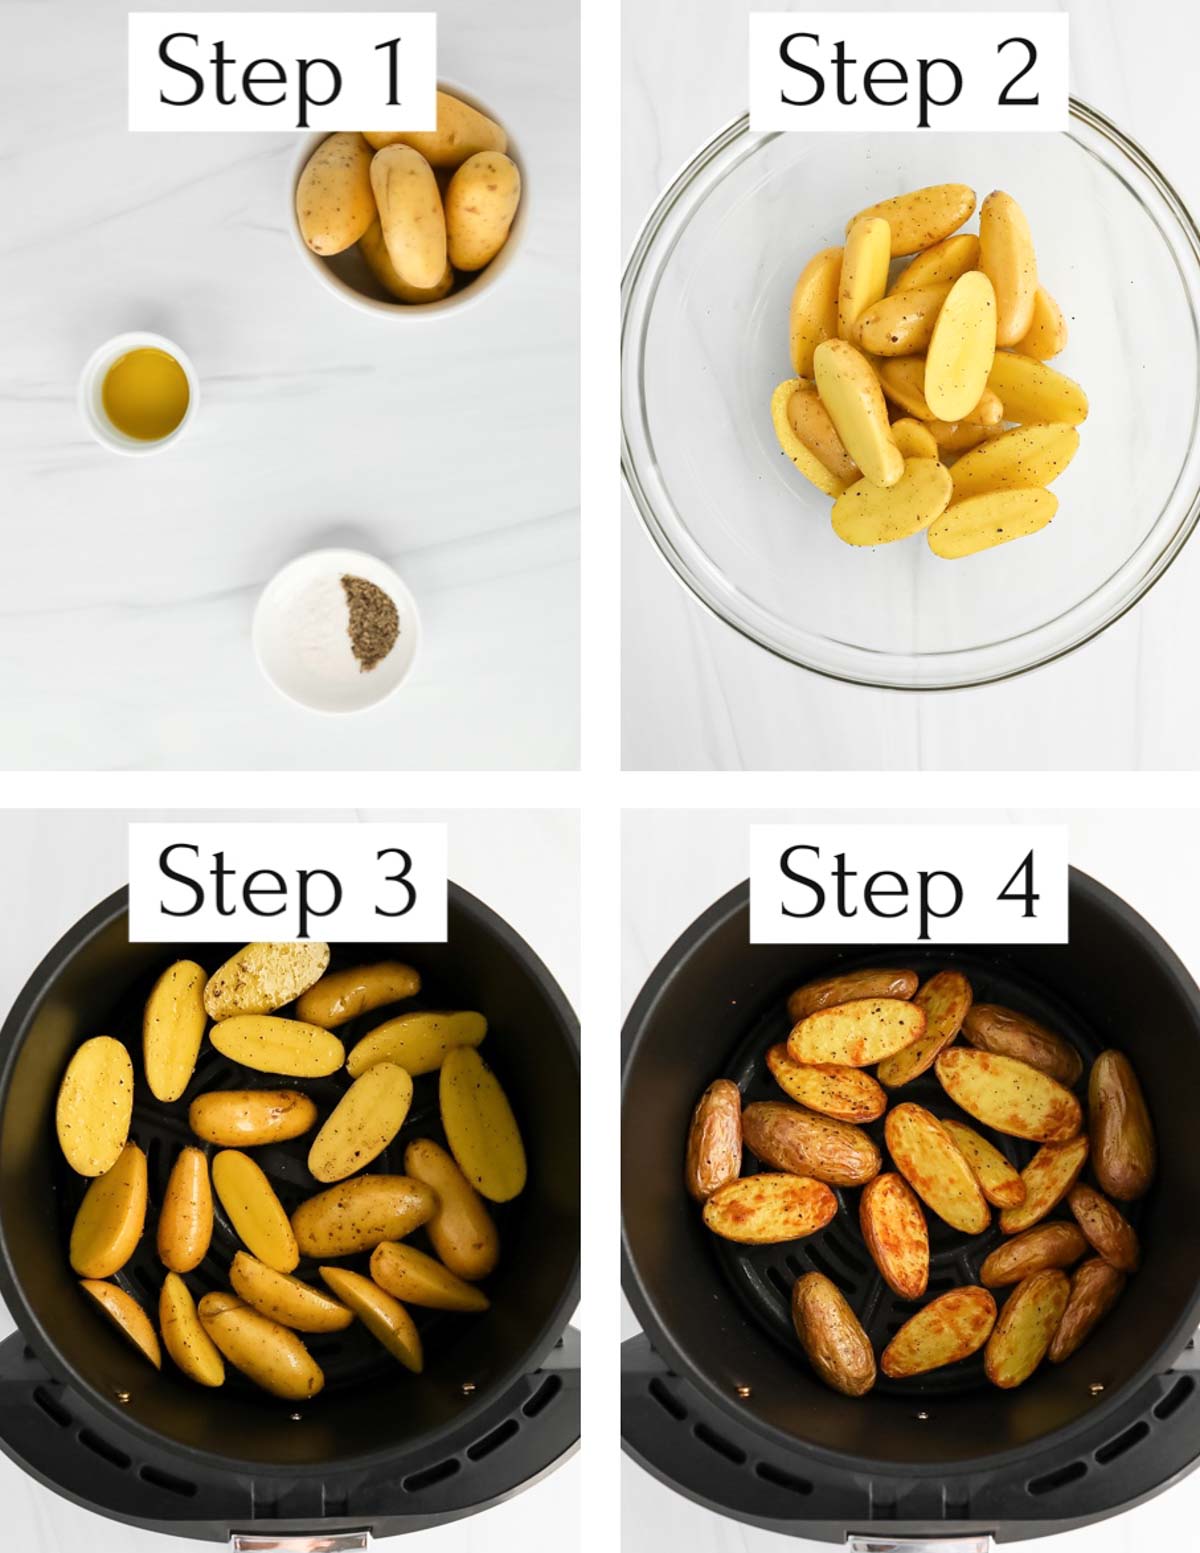 Four images labeled step 1-4. Step 1: ingredients in small white bowls, step 2: potatoes in a clear bowl, step 3: uncooked potatoes in an air fryer, step 4: cooked potatoes in an air fryer.